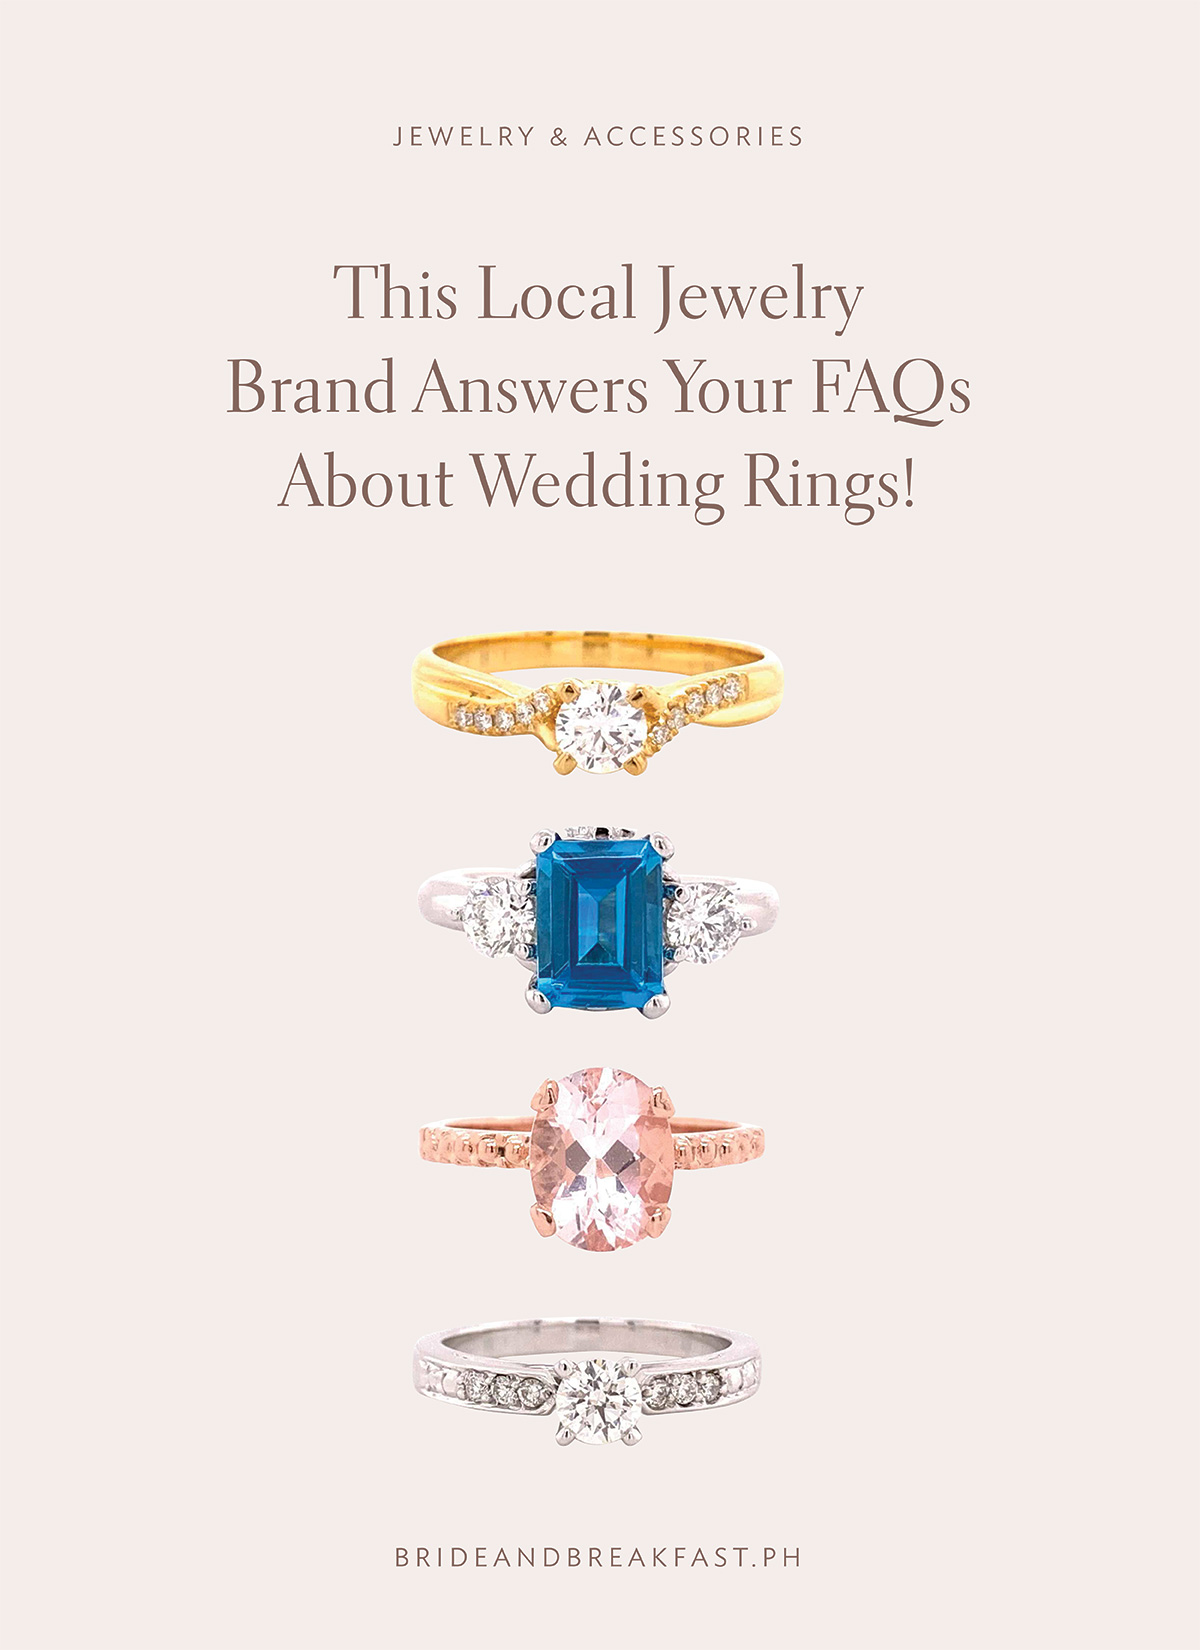 This Local Jewelry Brand Answers Your Questions About Wedding Rings!